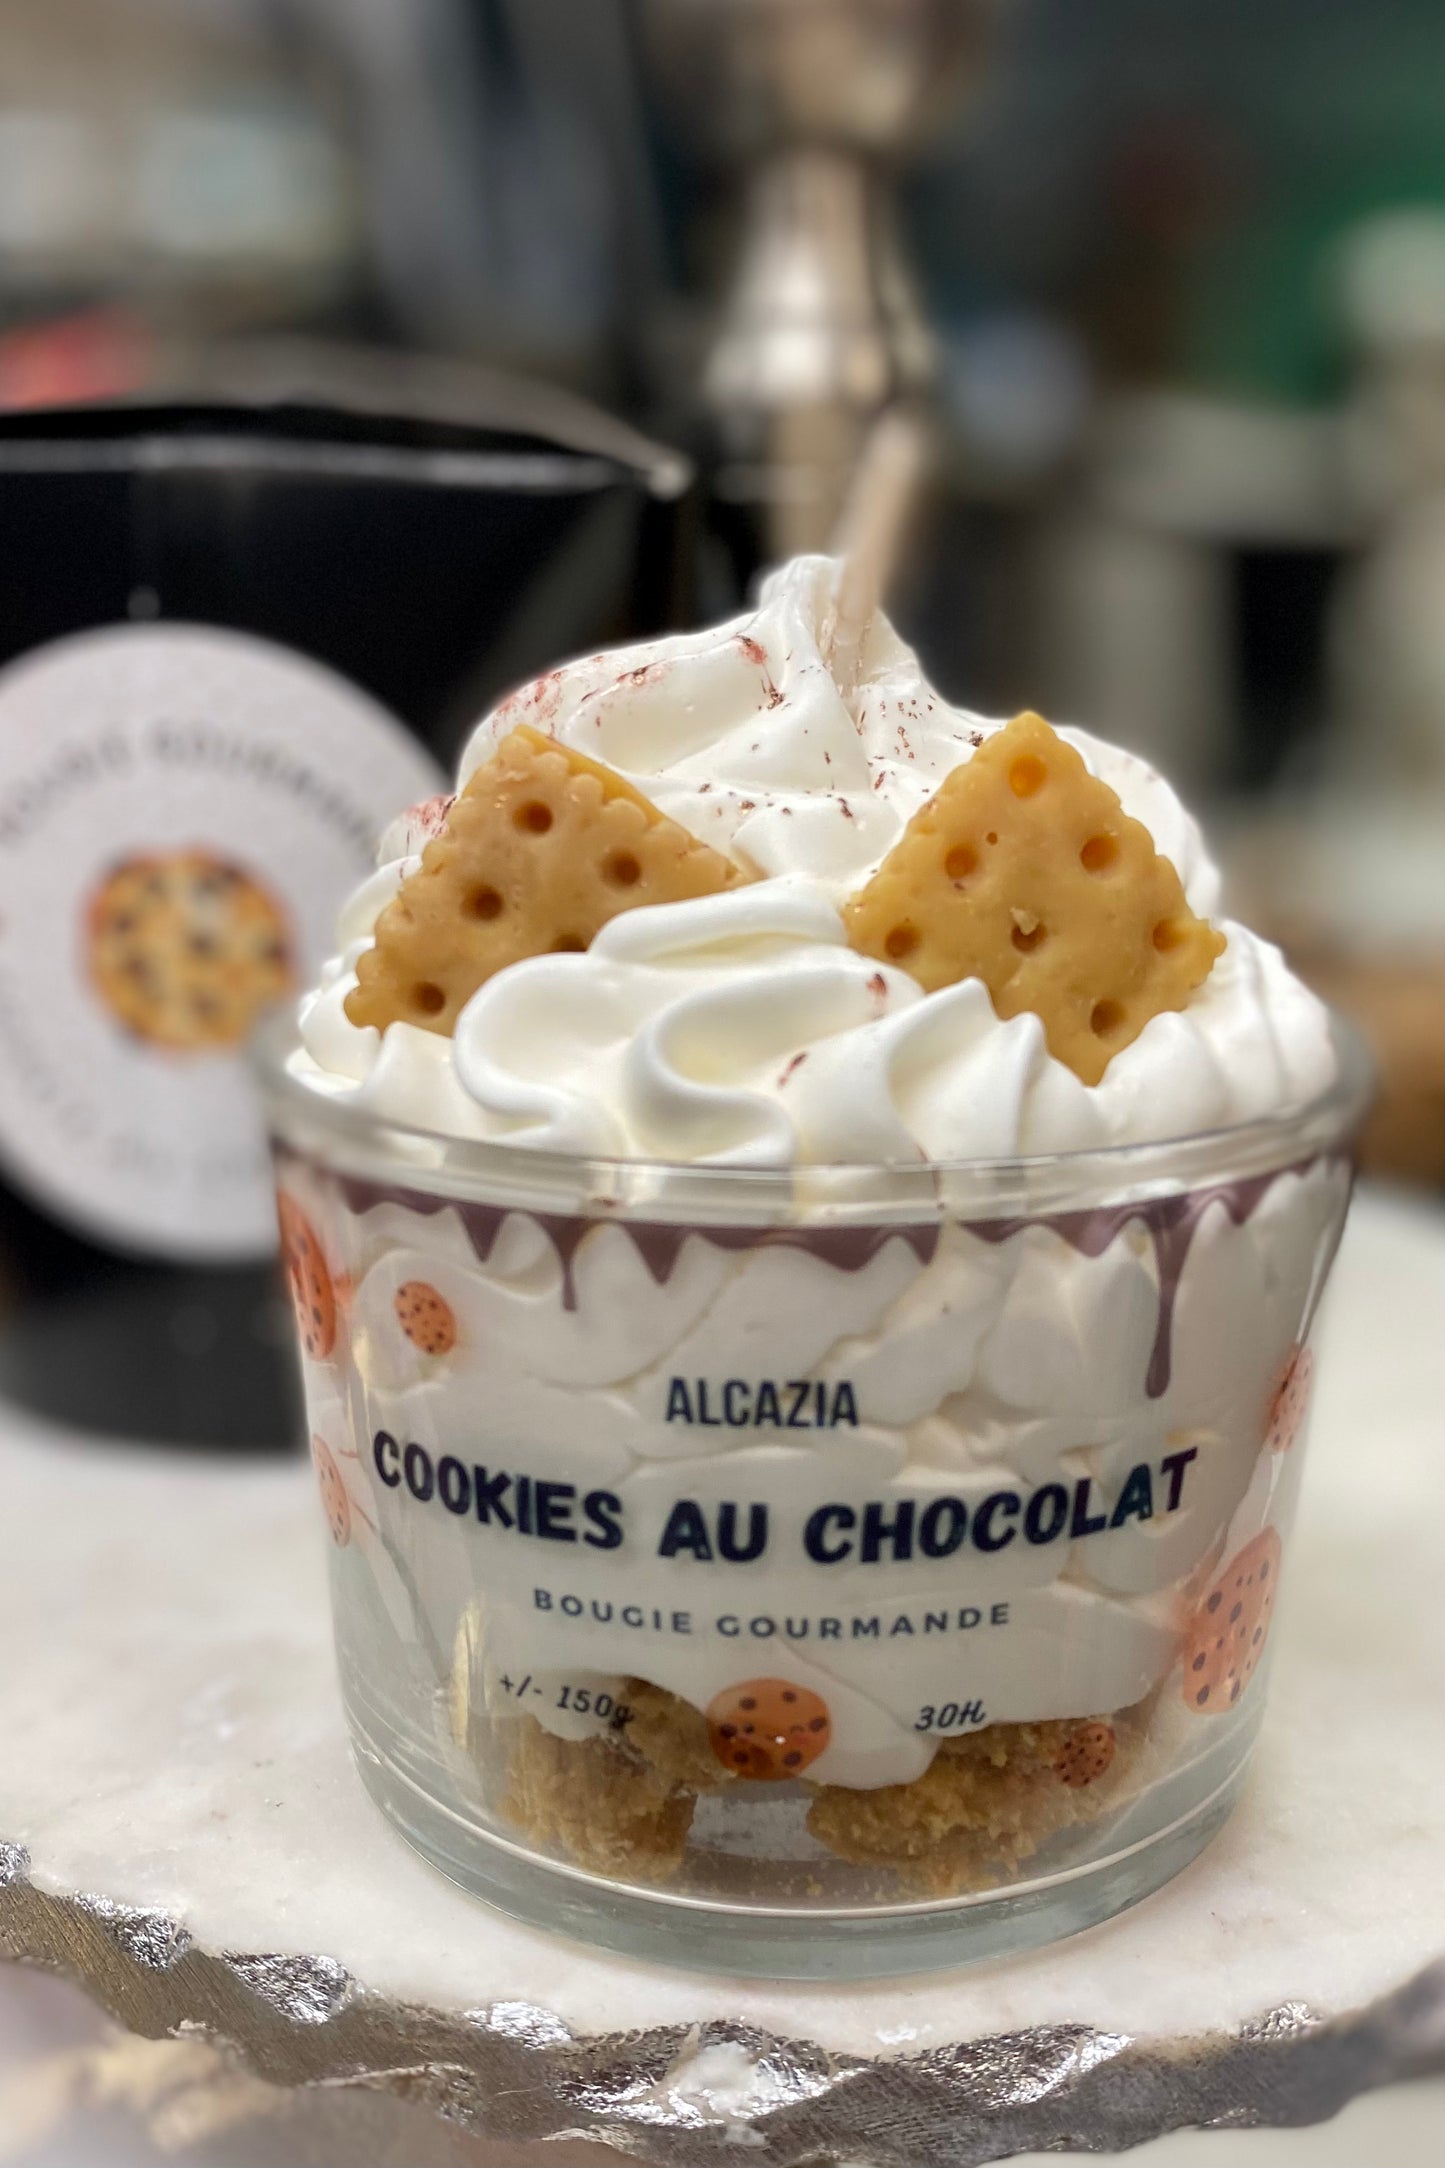 Cookies au Chocolat Candle from the Alcazia Collection imported from France